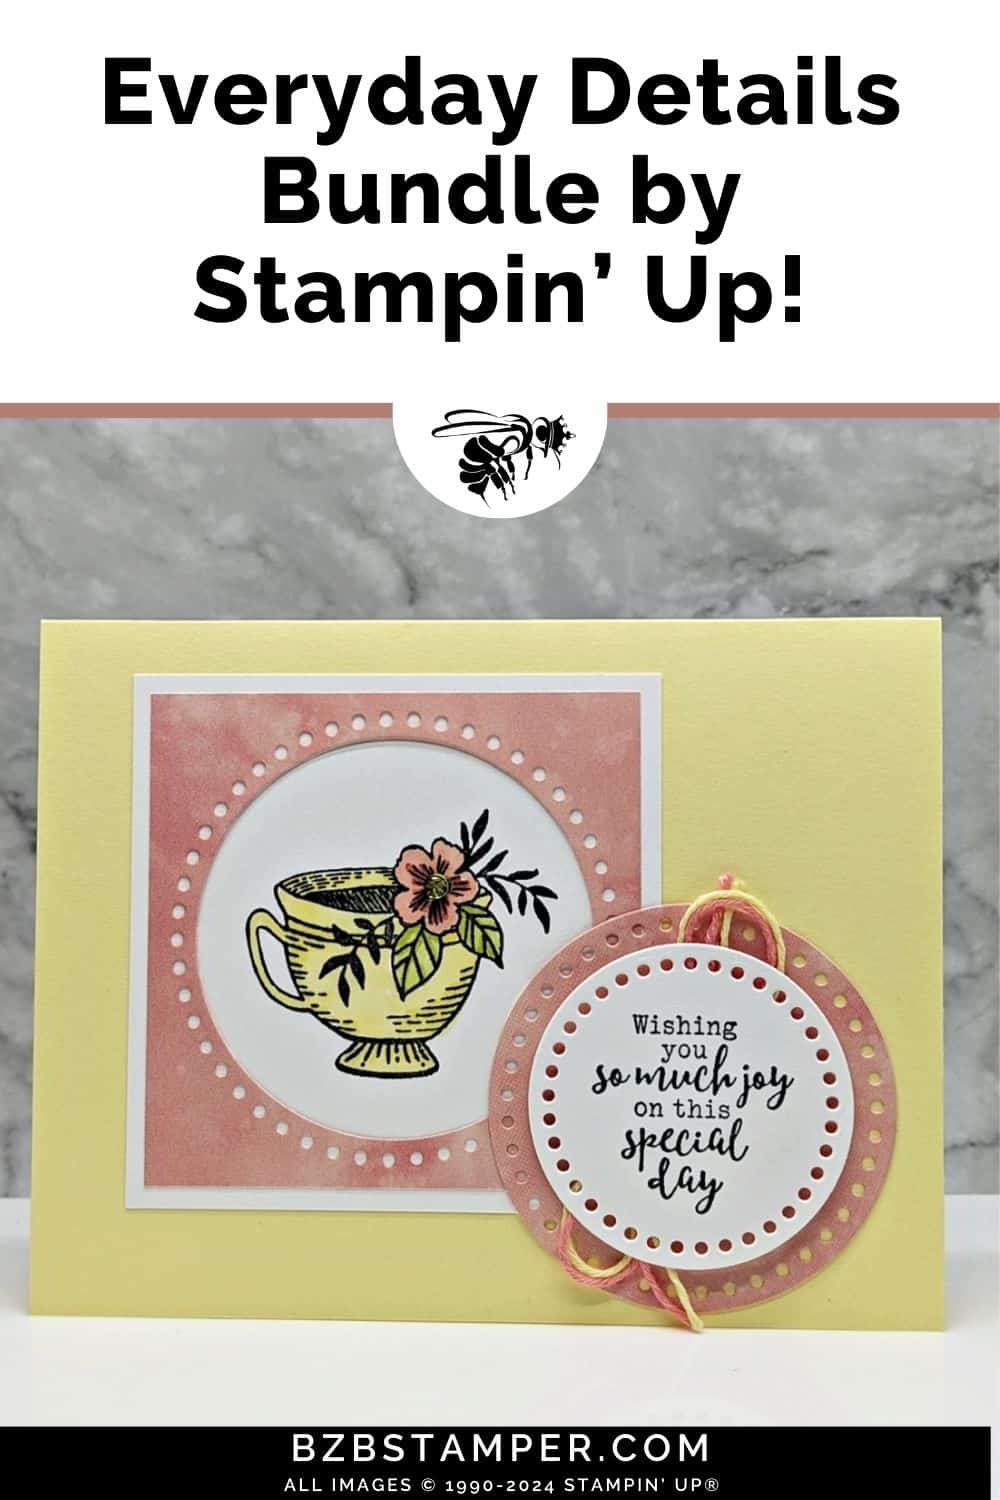 032824 stampin up everyday details pin1